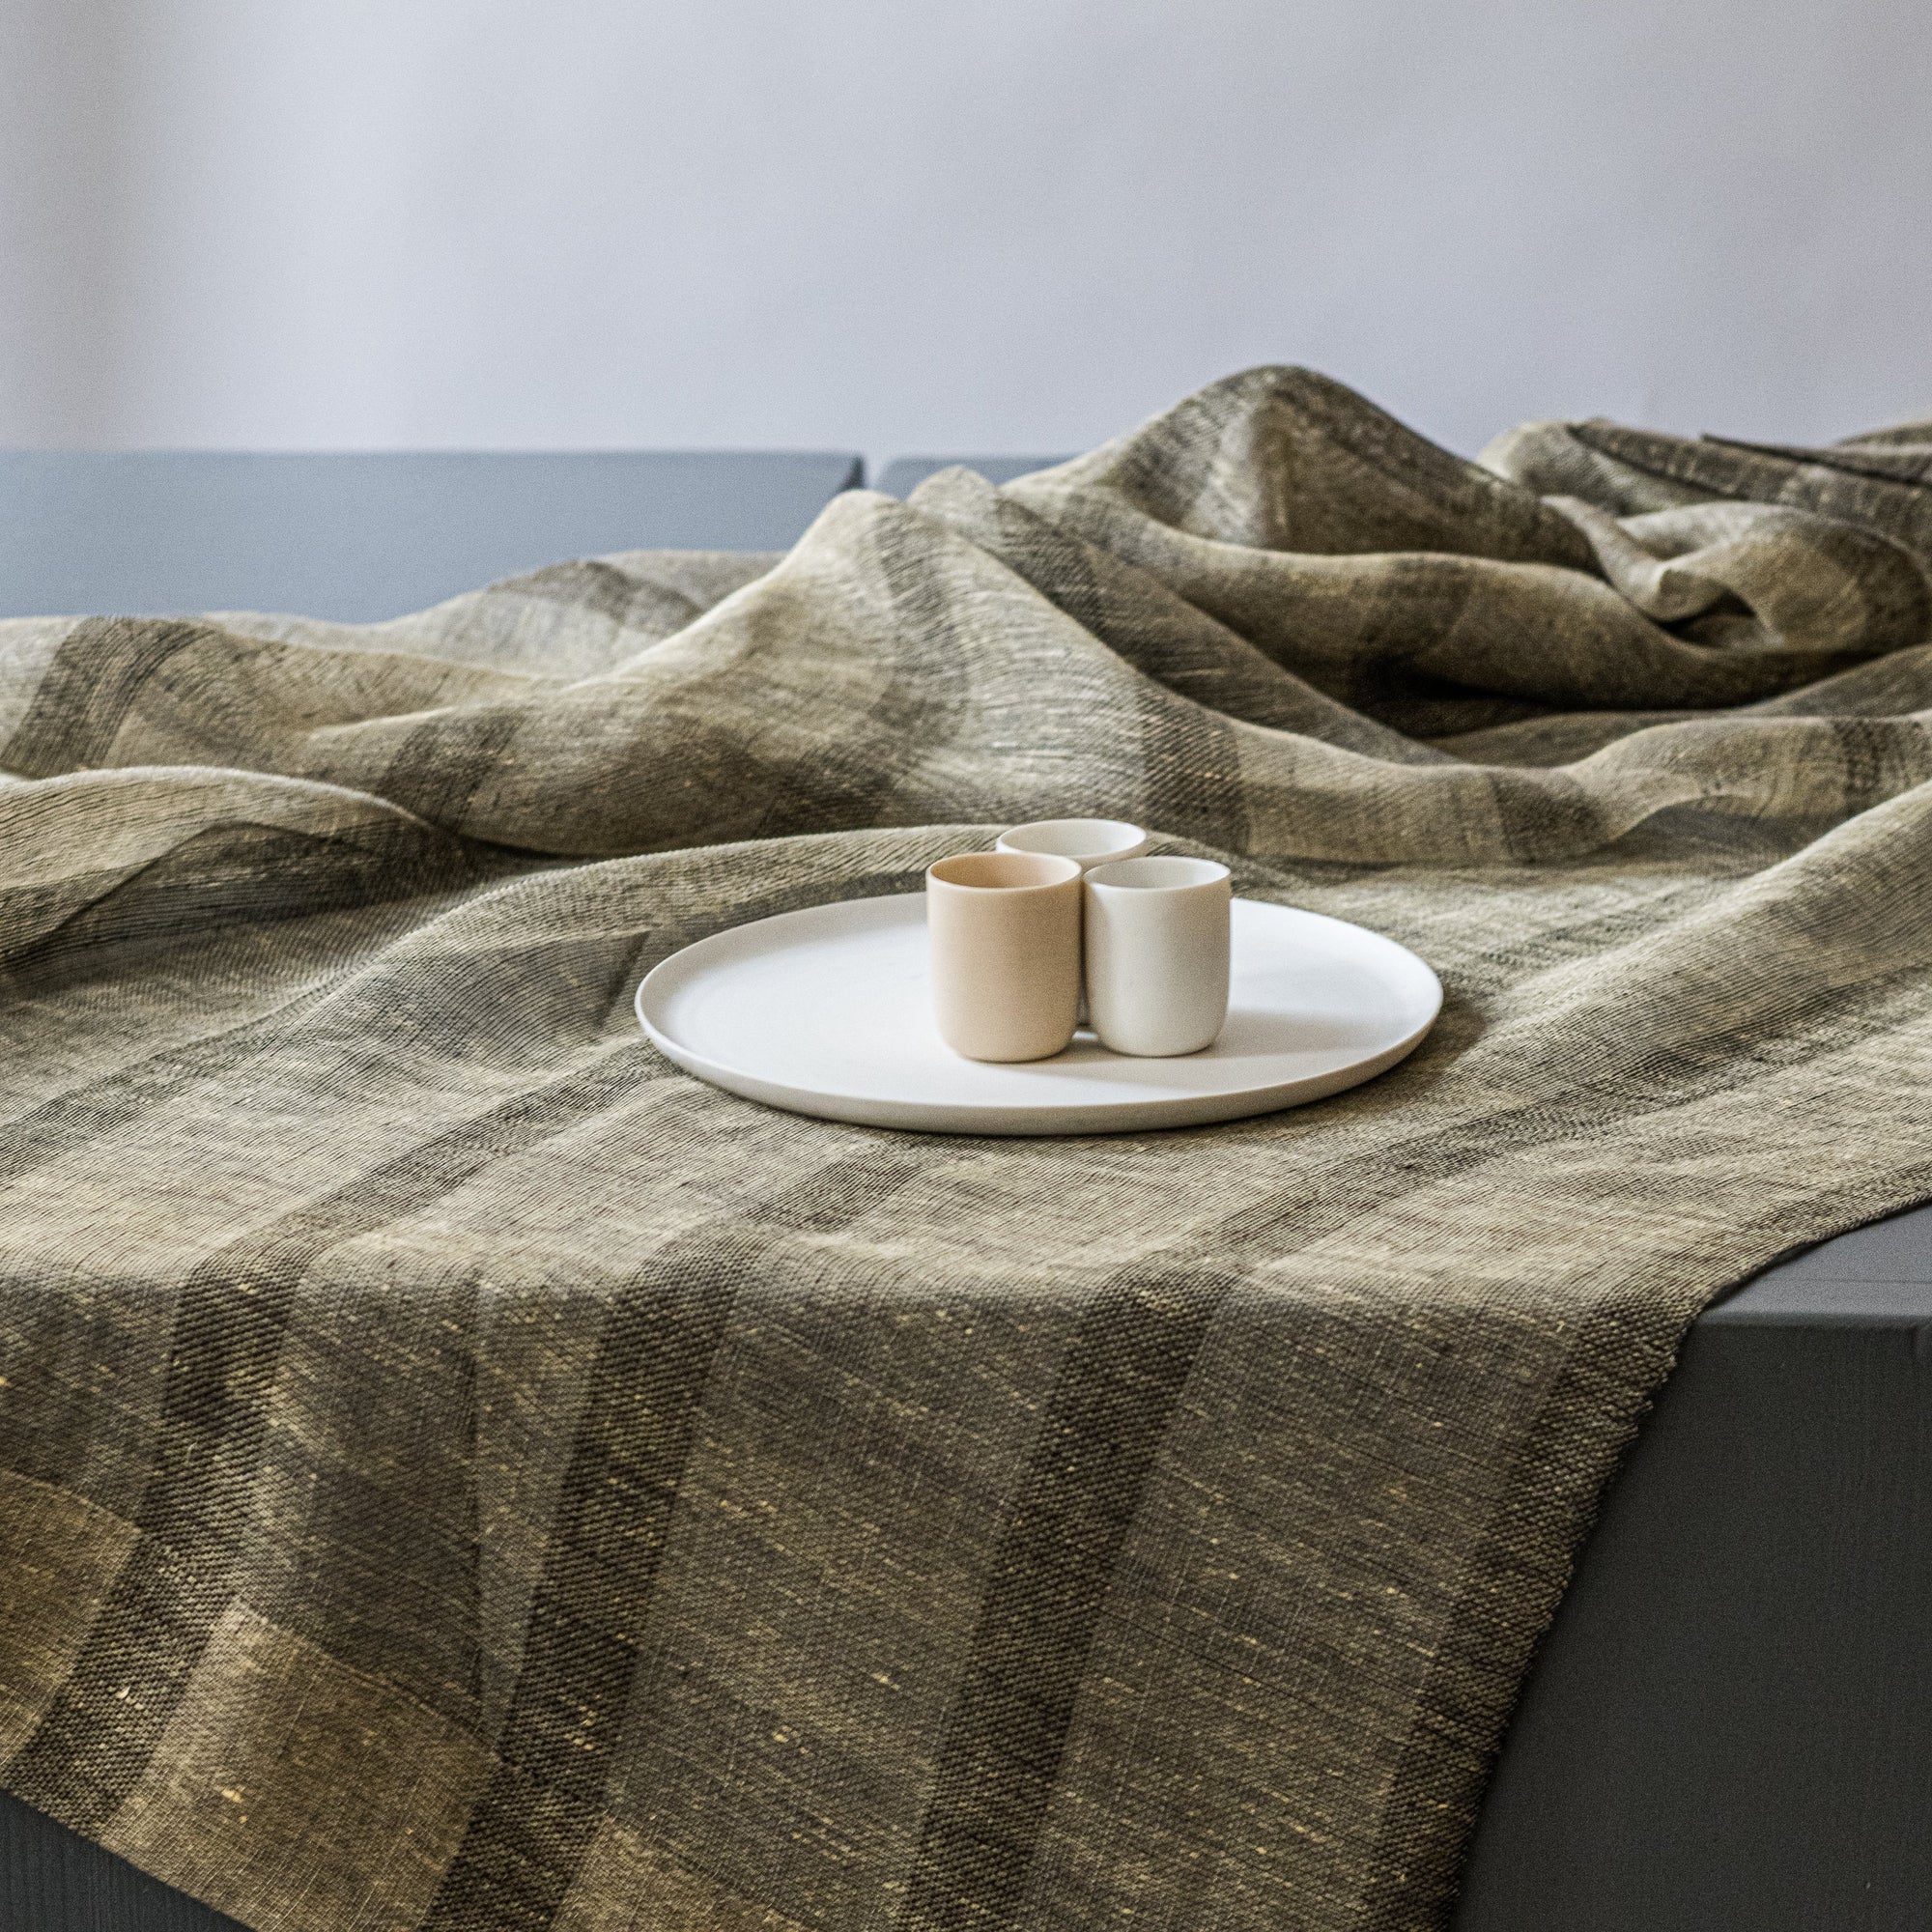 Linen tablecloth Inita 160x260cm with stripes in light mustard and anthracite